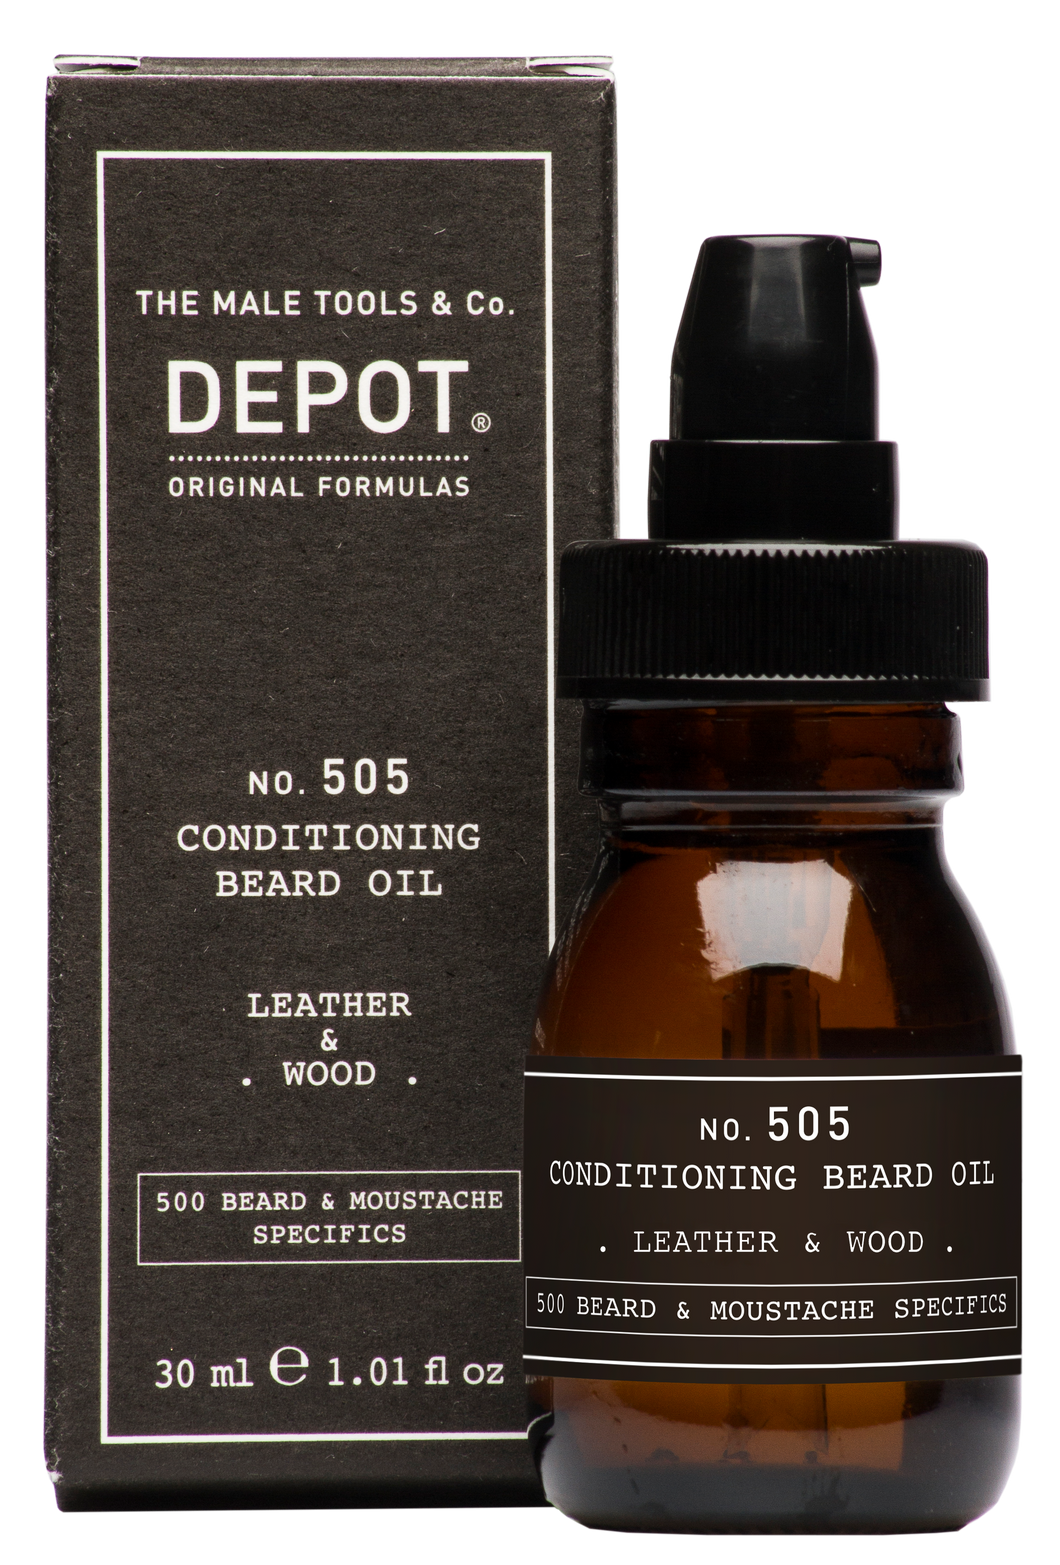 DEPOT MALE TOOL NO. 505 CONDITIONING BEARD OIL LEATHER & WOOD